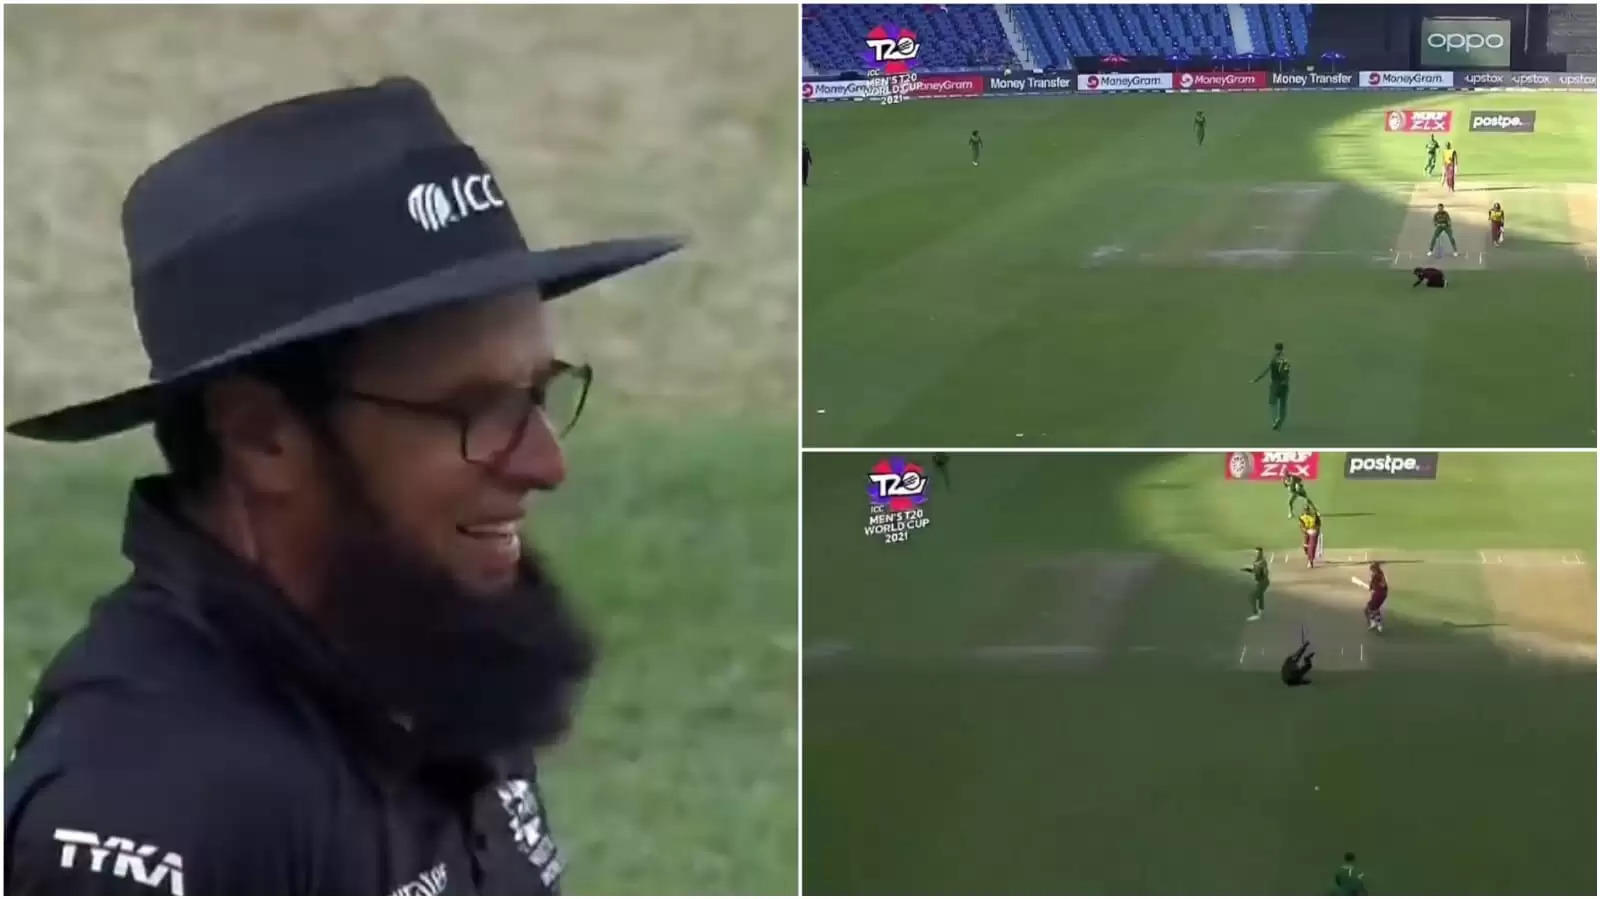 WATCH: Umpire Aleem Dar ducks to avoid being hit by Pollard’s shot, nearly gets hit by throw from other side